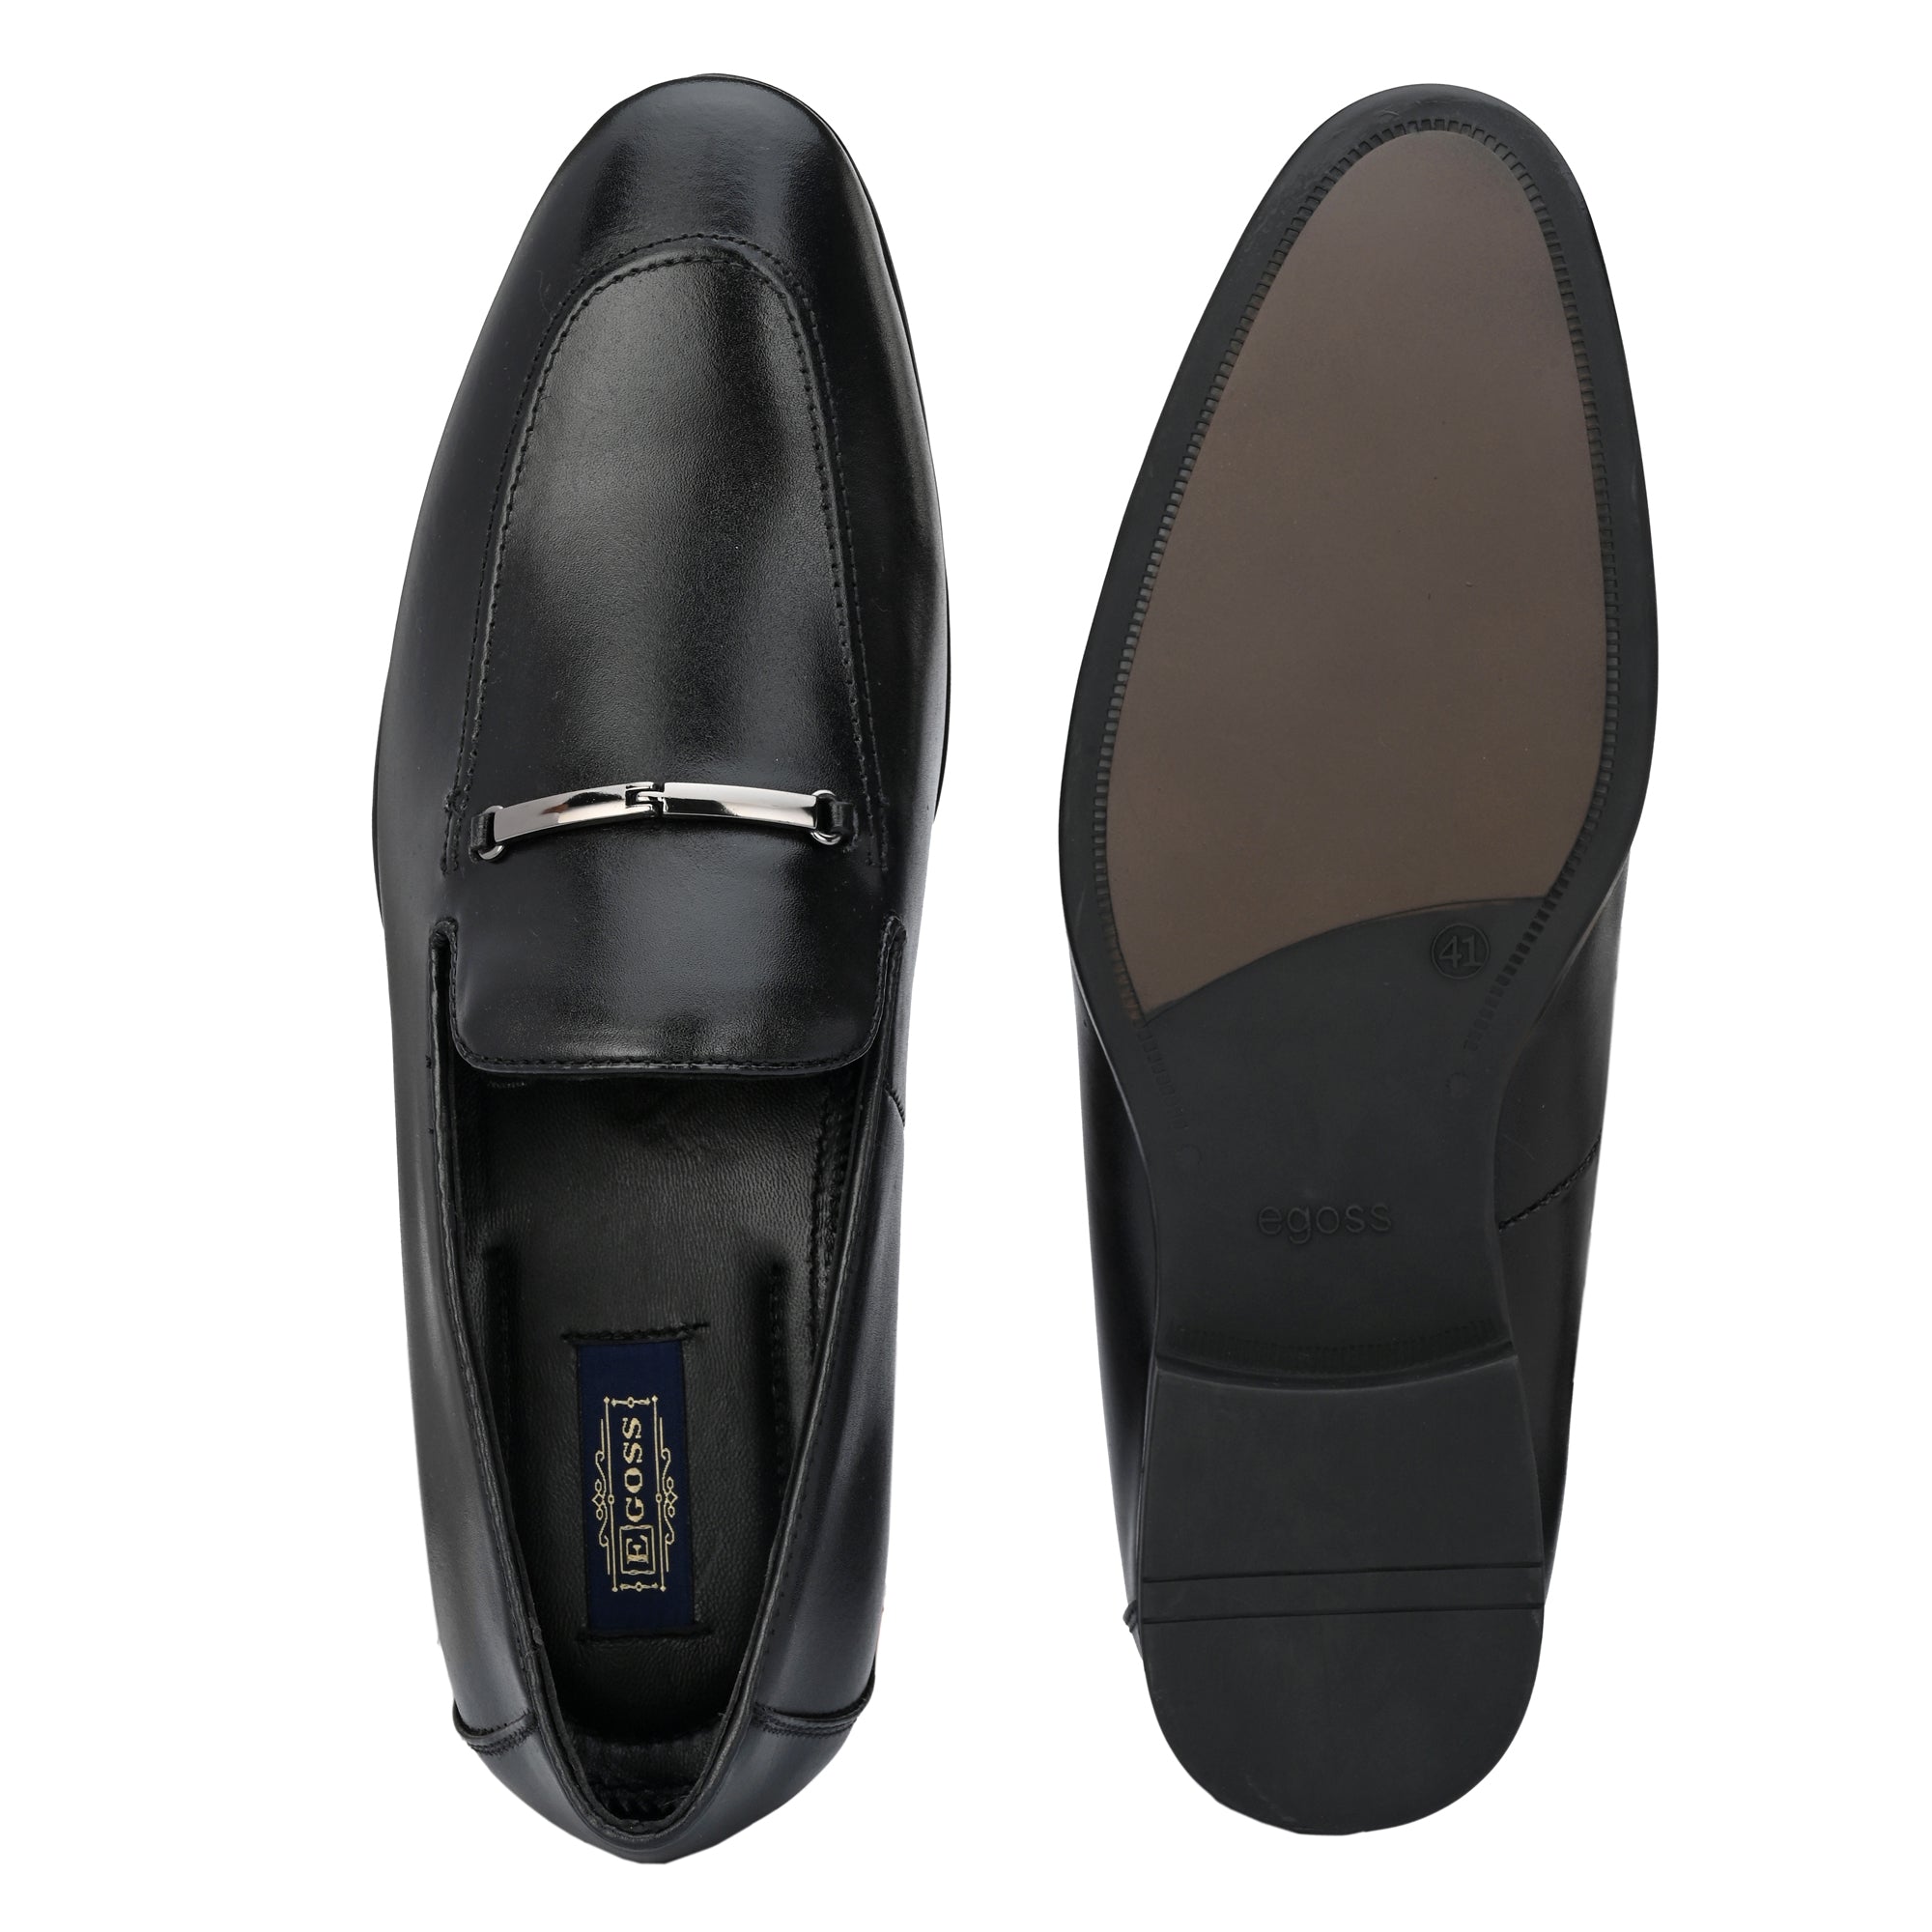 Egoss Mens Buckled Formal Loafers Shoes